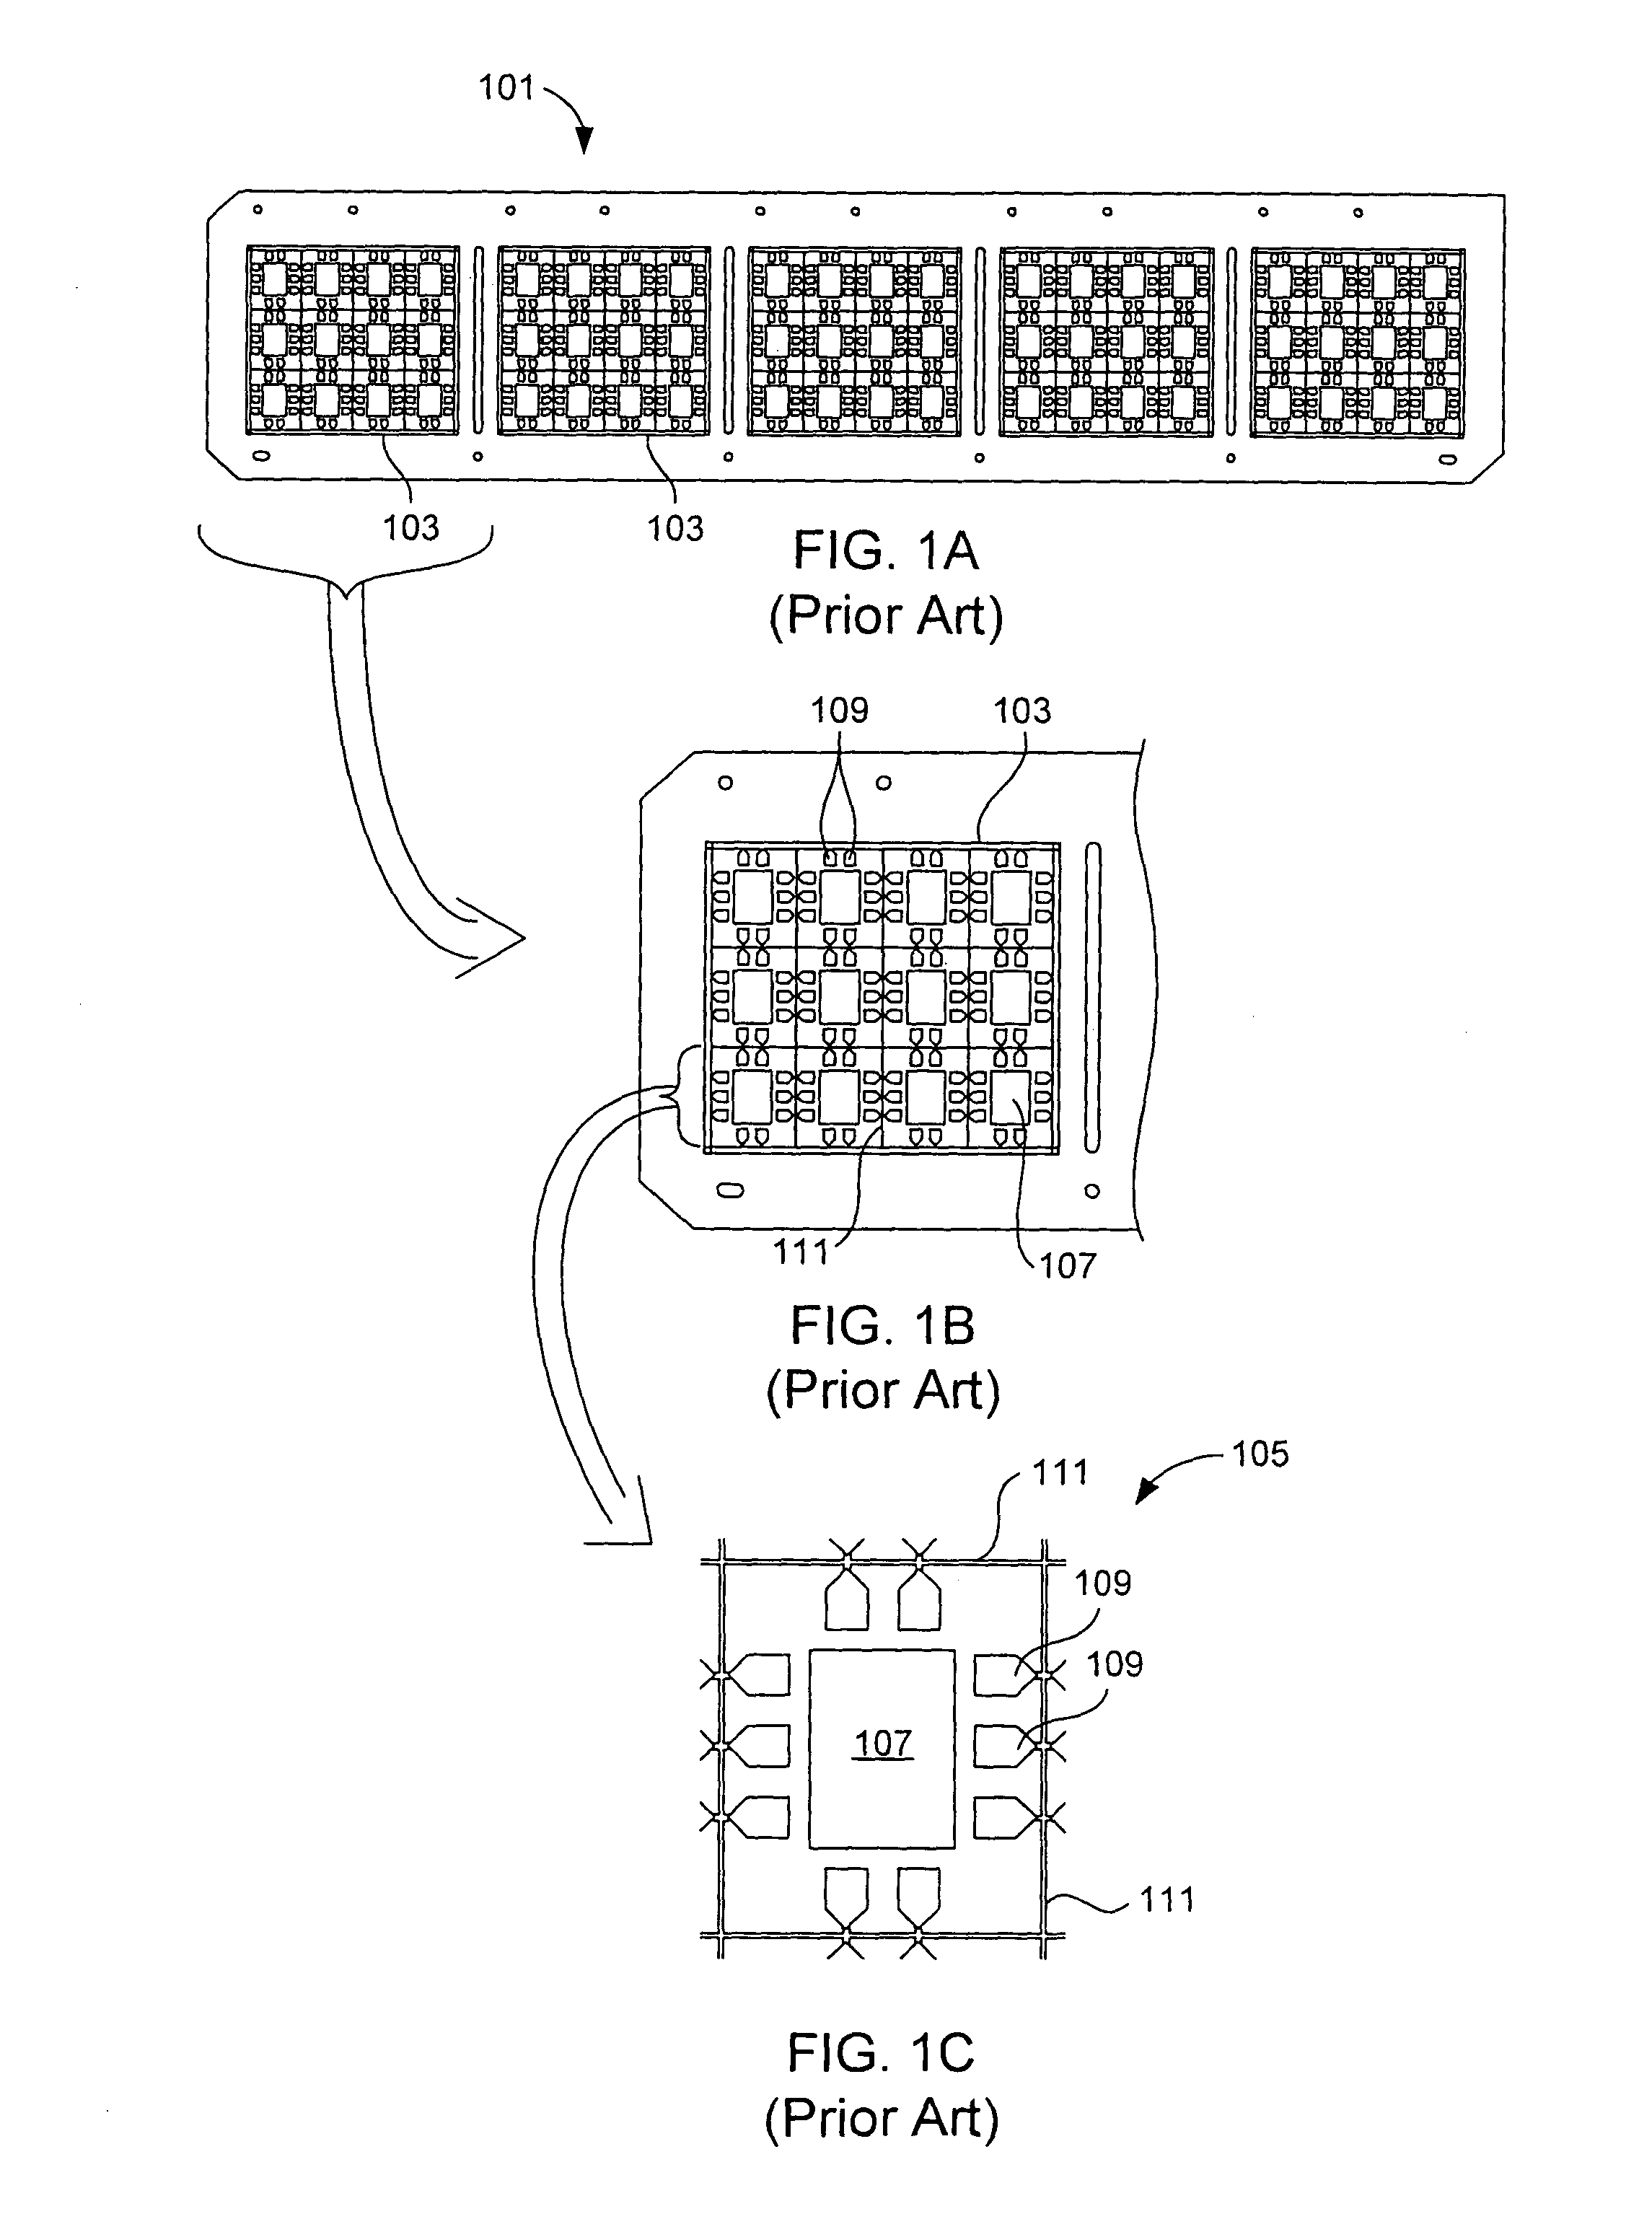 Substrate for use in semiconductor manufacturing and method of making same